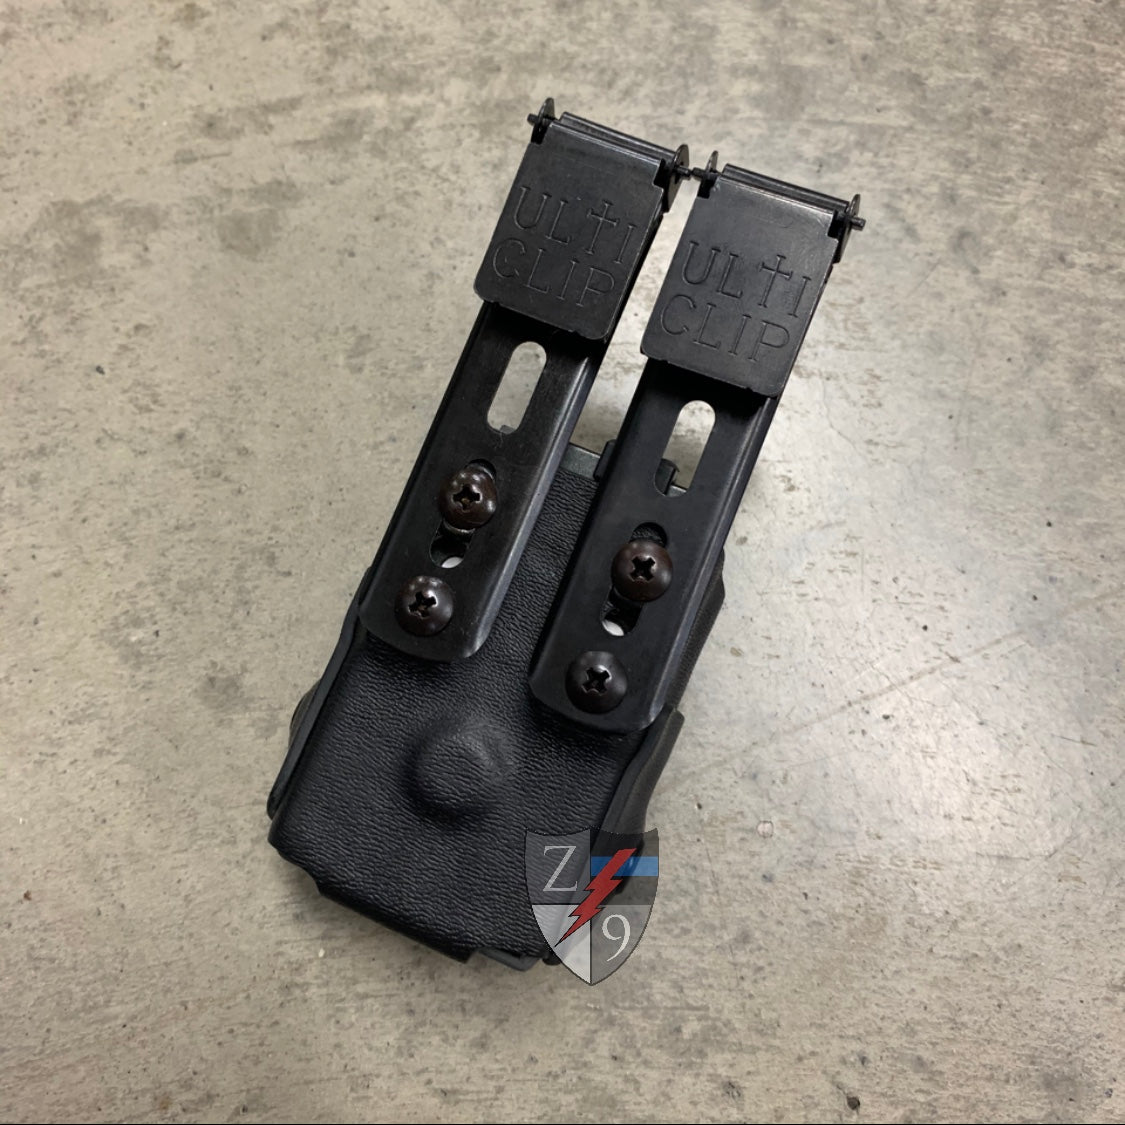 Additional Hardware and Attachments – Zero9 Holsters